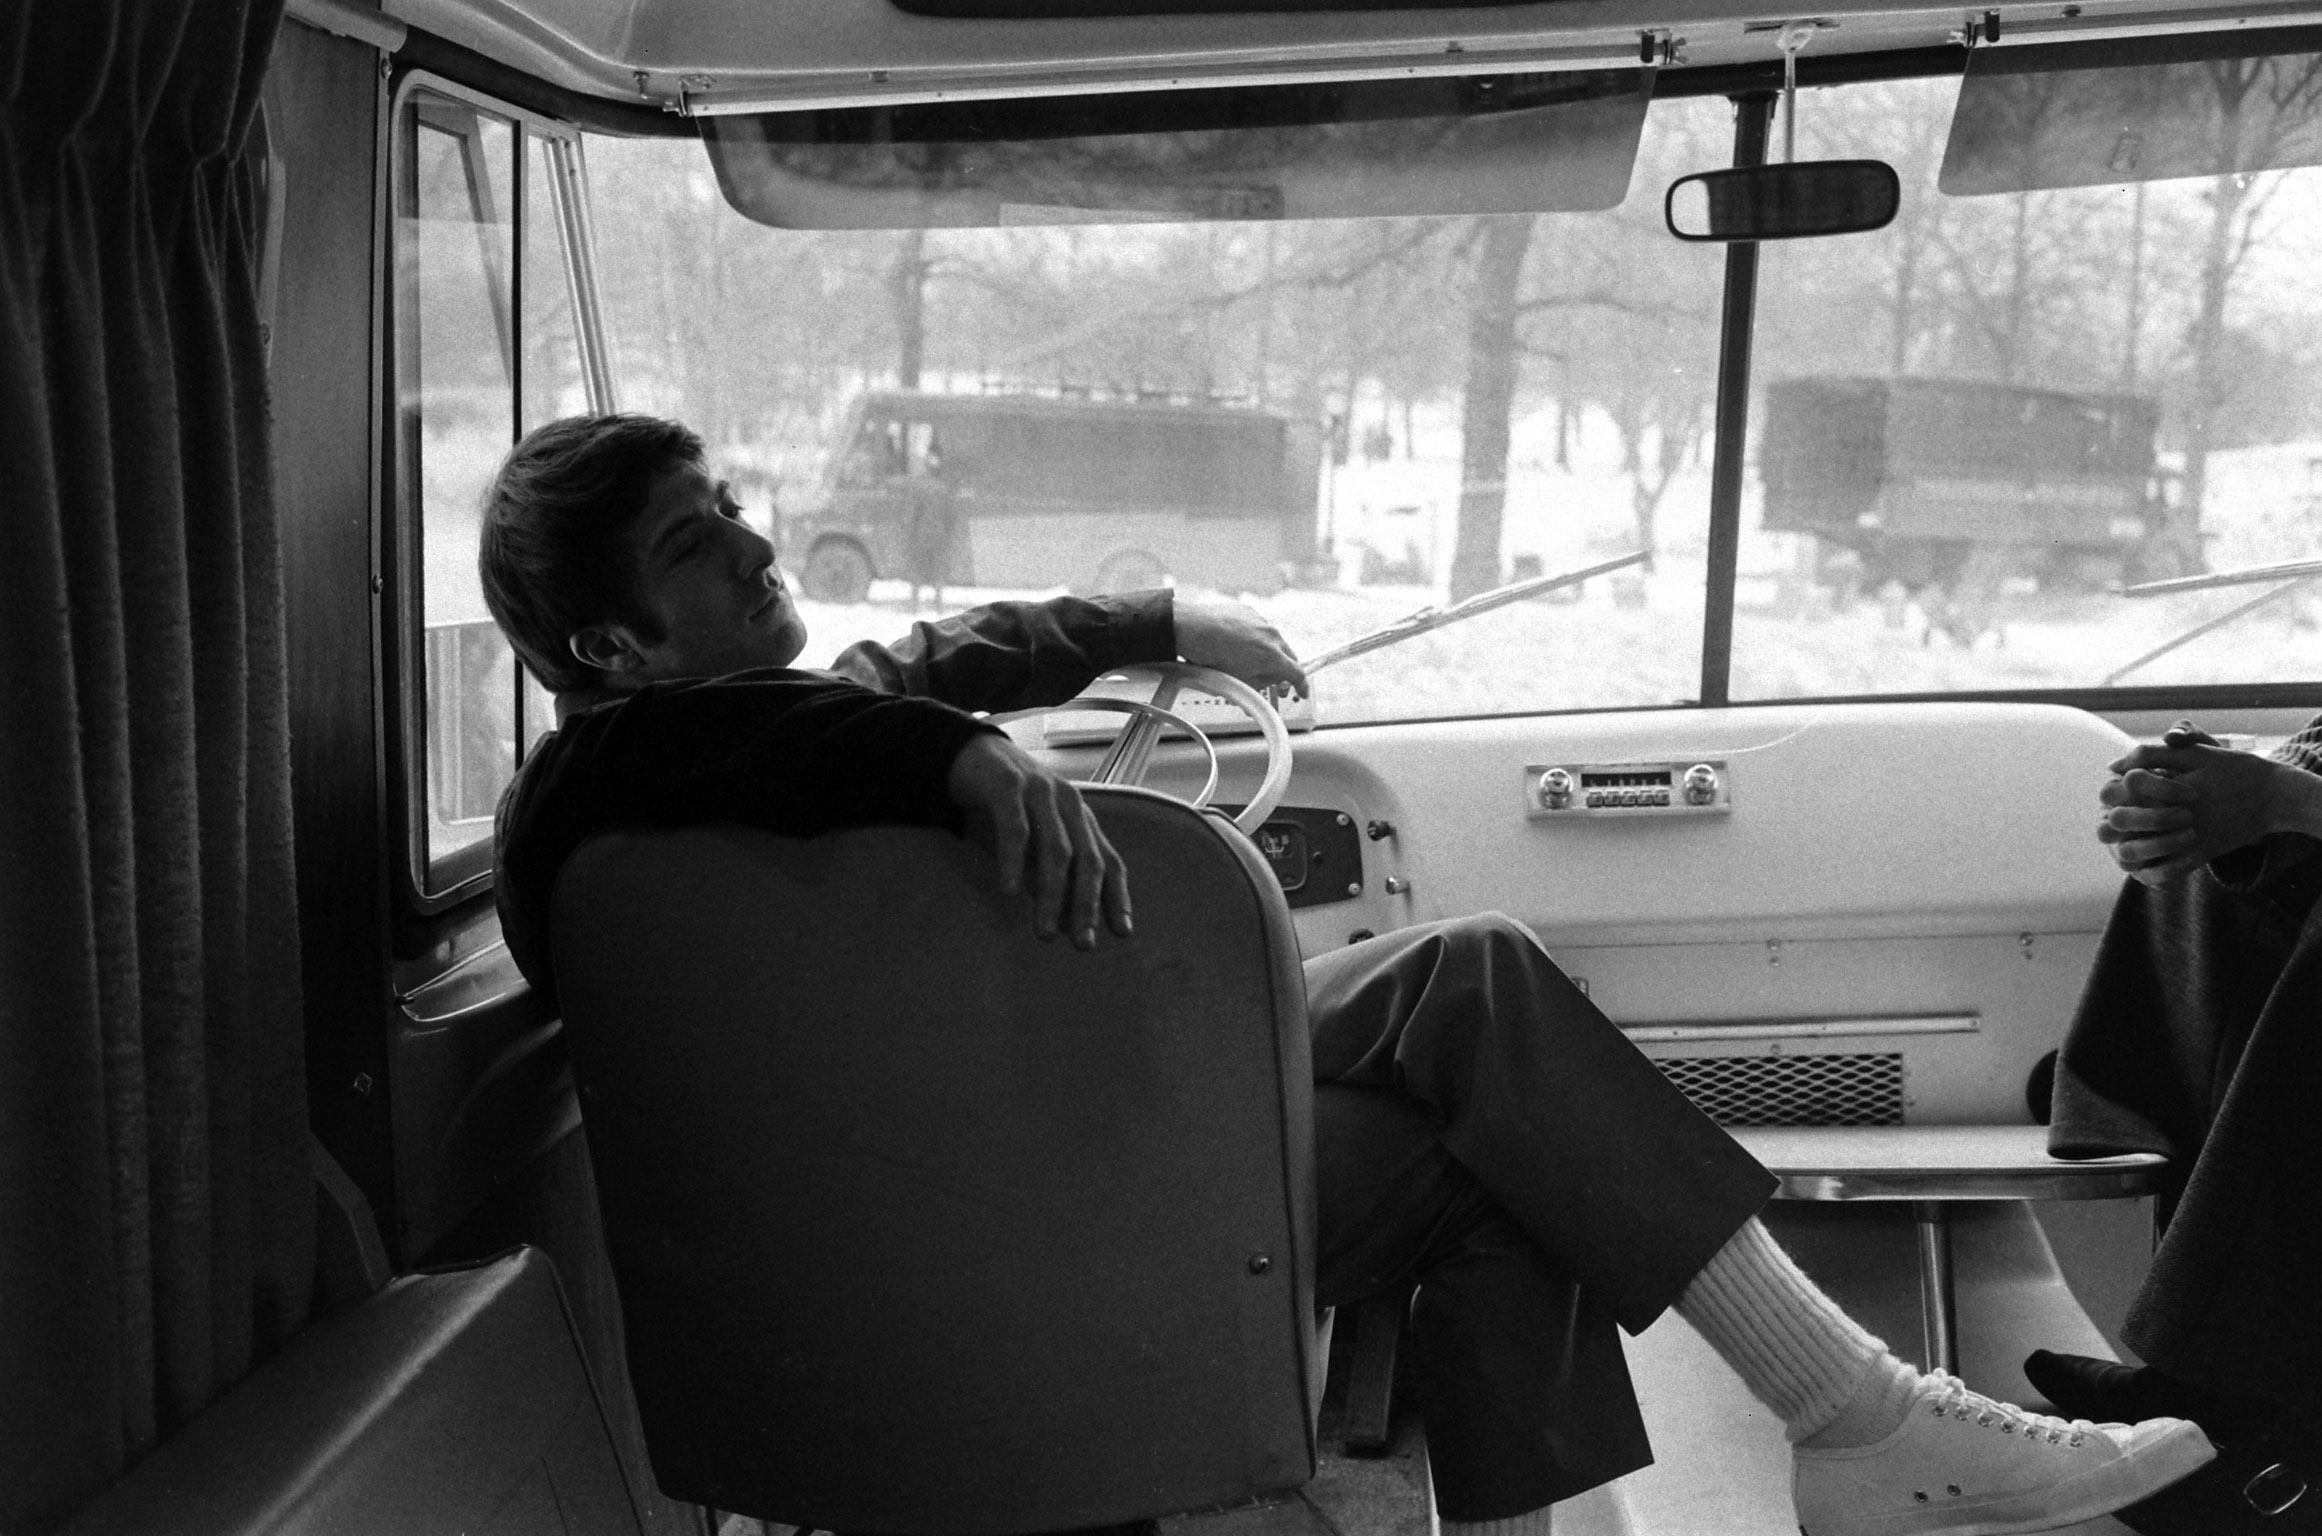 Dustin Hoffman in his trailer during the filming of the movie, John and Mary, in which he starred with Mia Farrow, New York City, 1969.